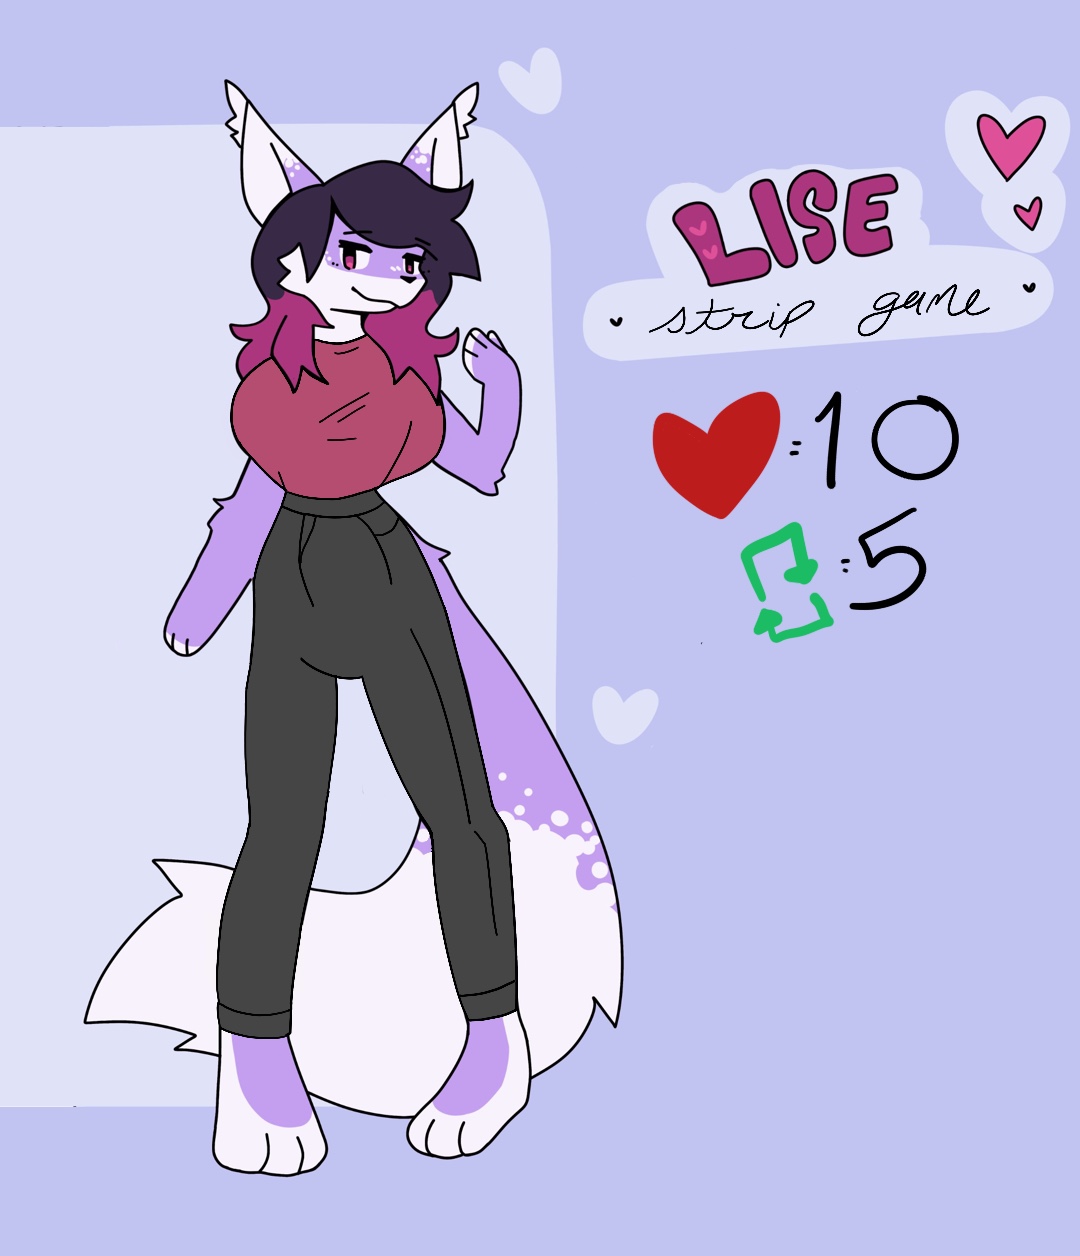 my fursona in a tight shirt and pants, drawn over the top seductive and with comically large breasts. on the side is the text 'lise strip game', acompanied by text saying '10 likes' and '5 retweets'